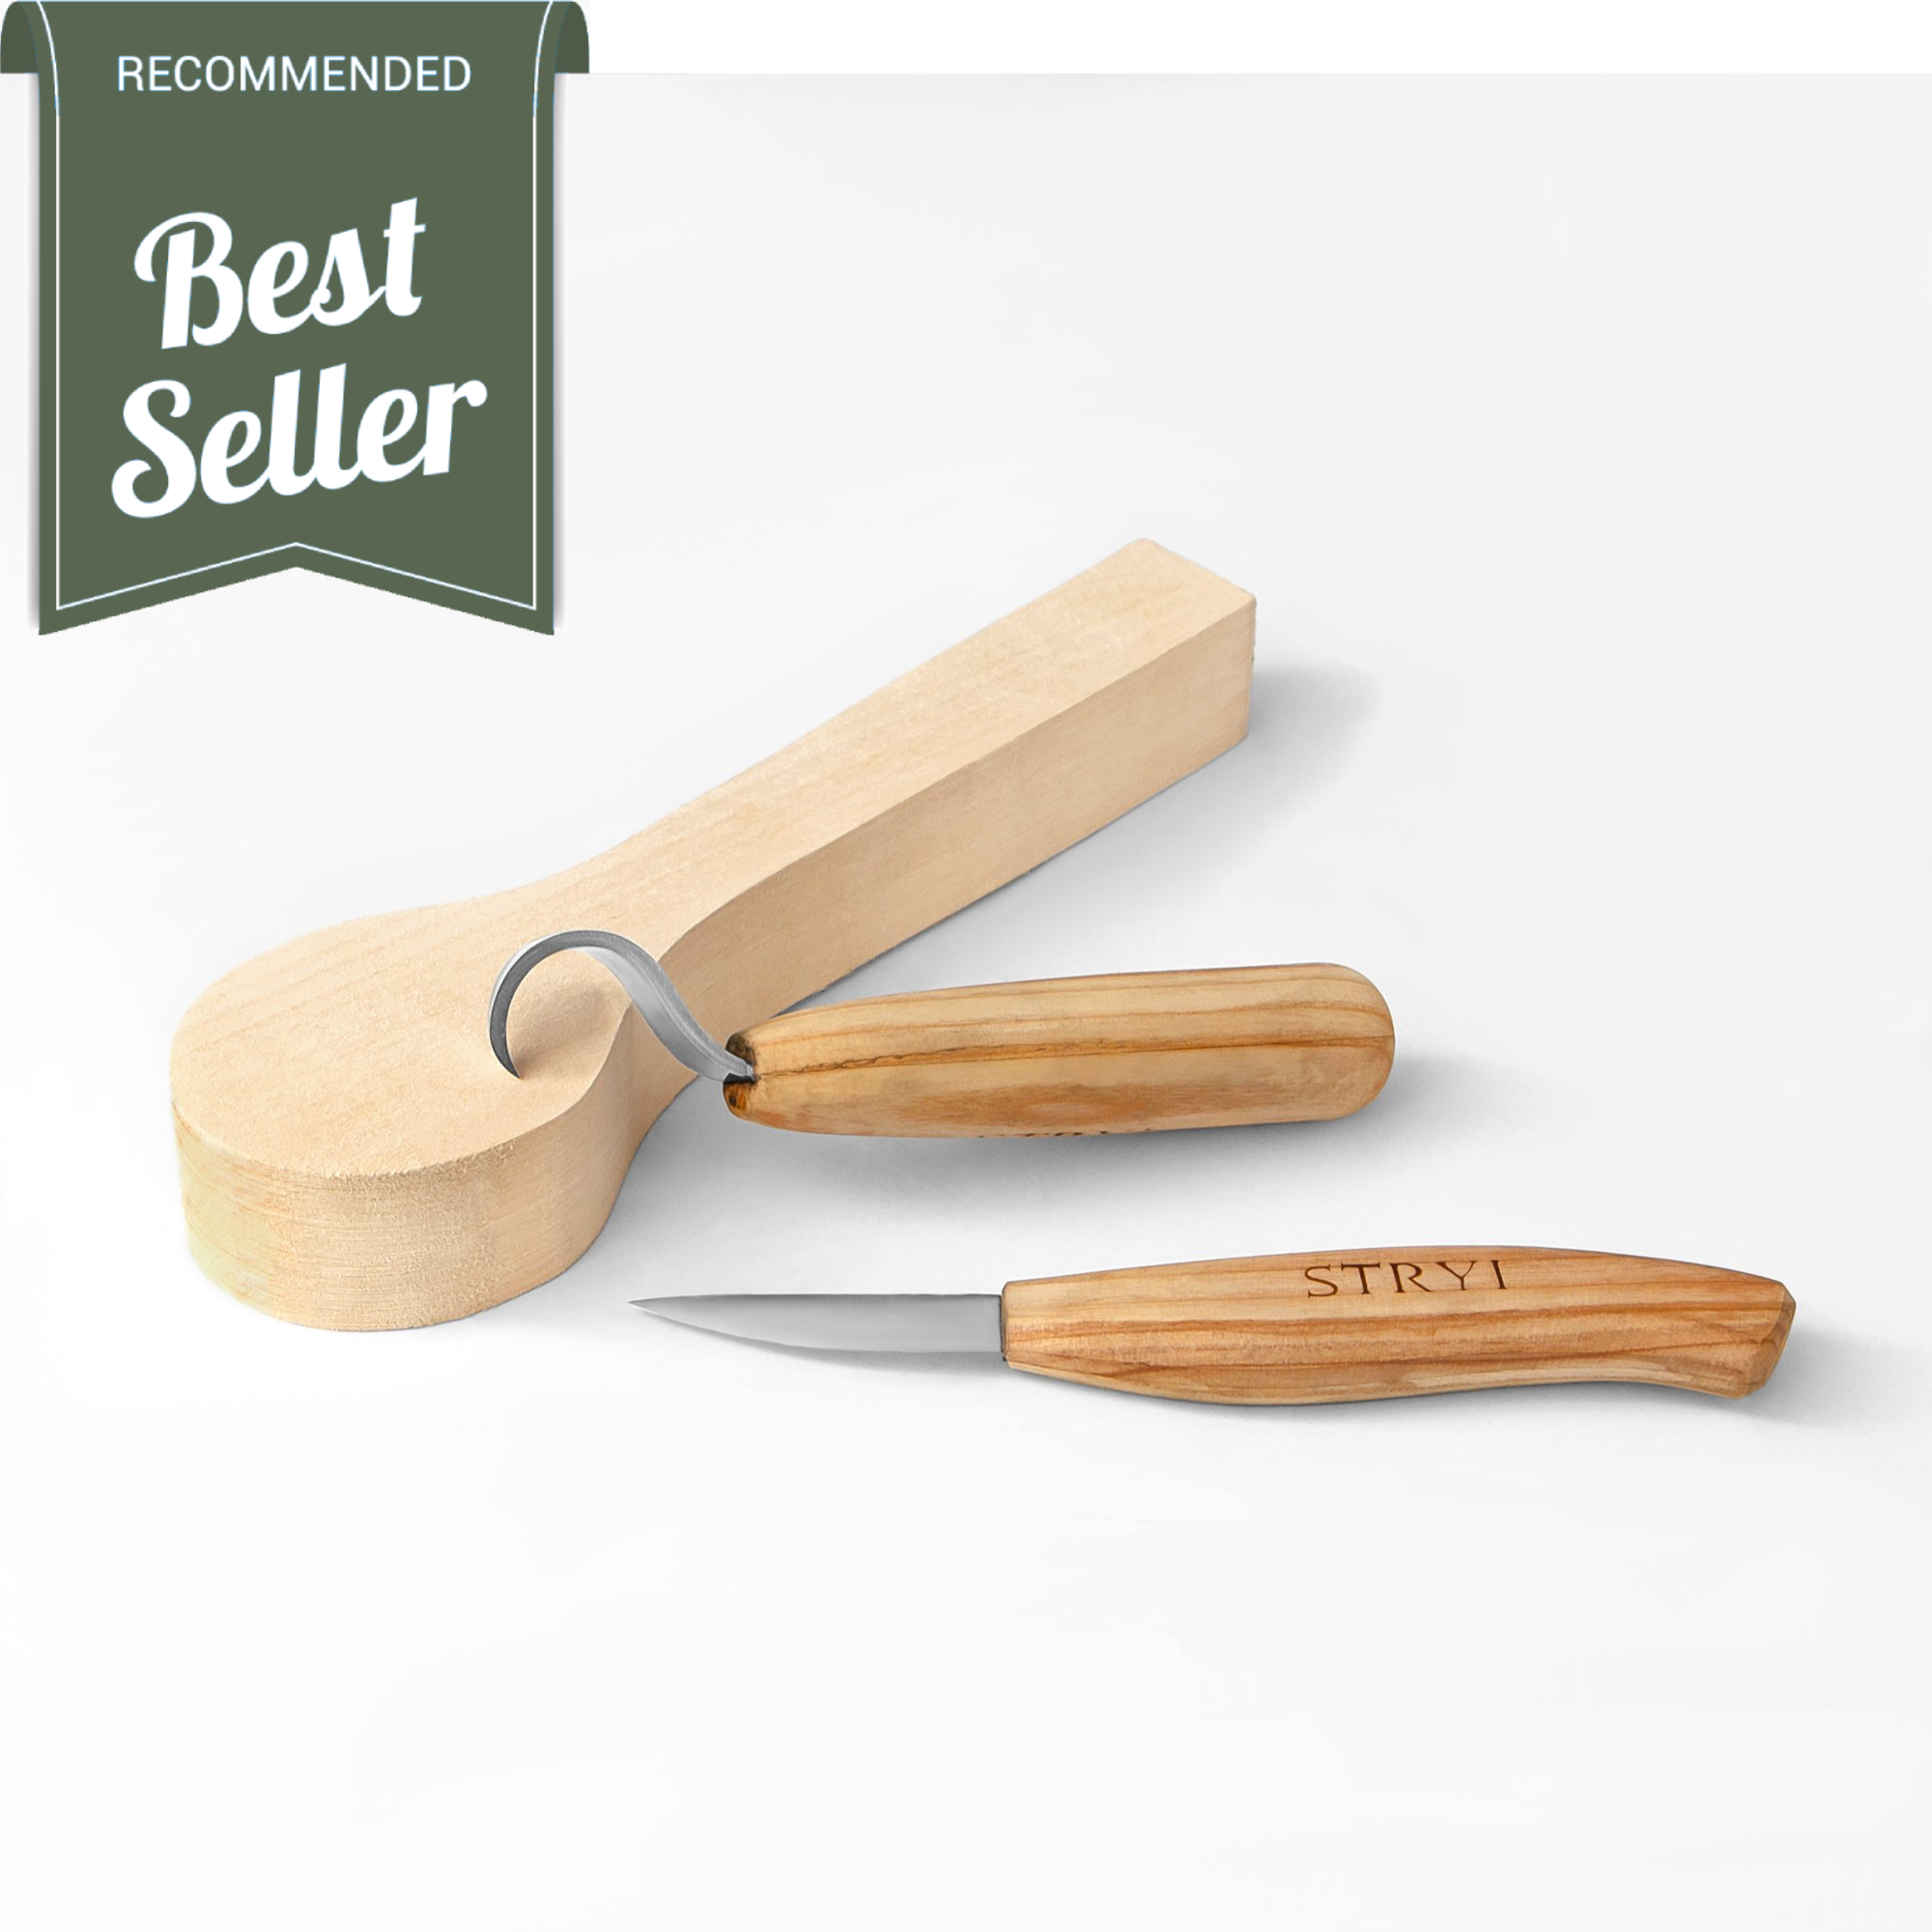 Spoon Carving Knife Set 2pcs. Forged Spoon Carving Knife. 